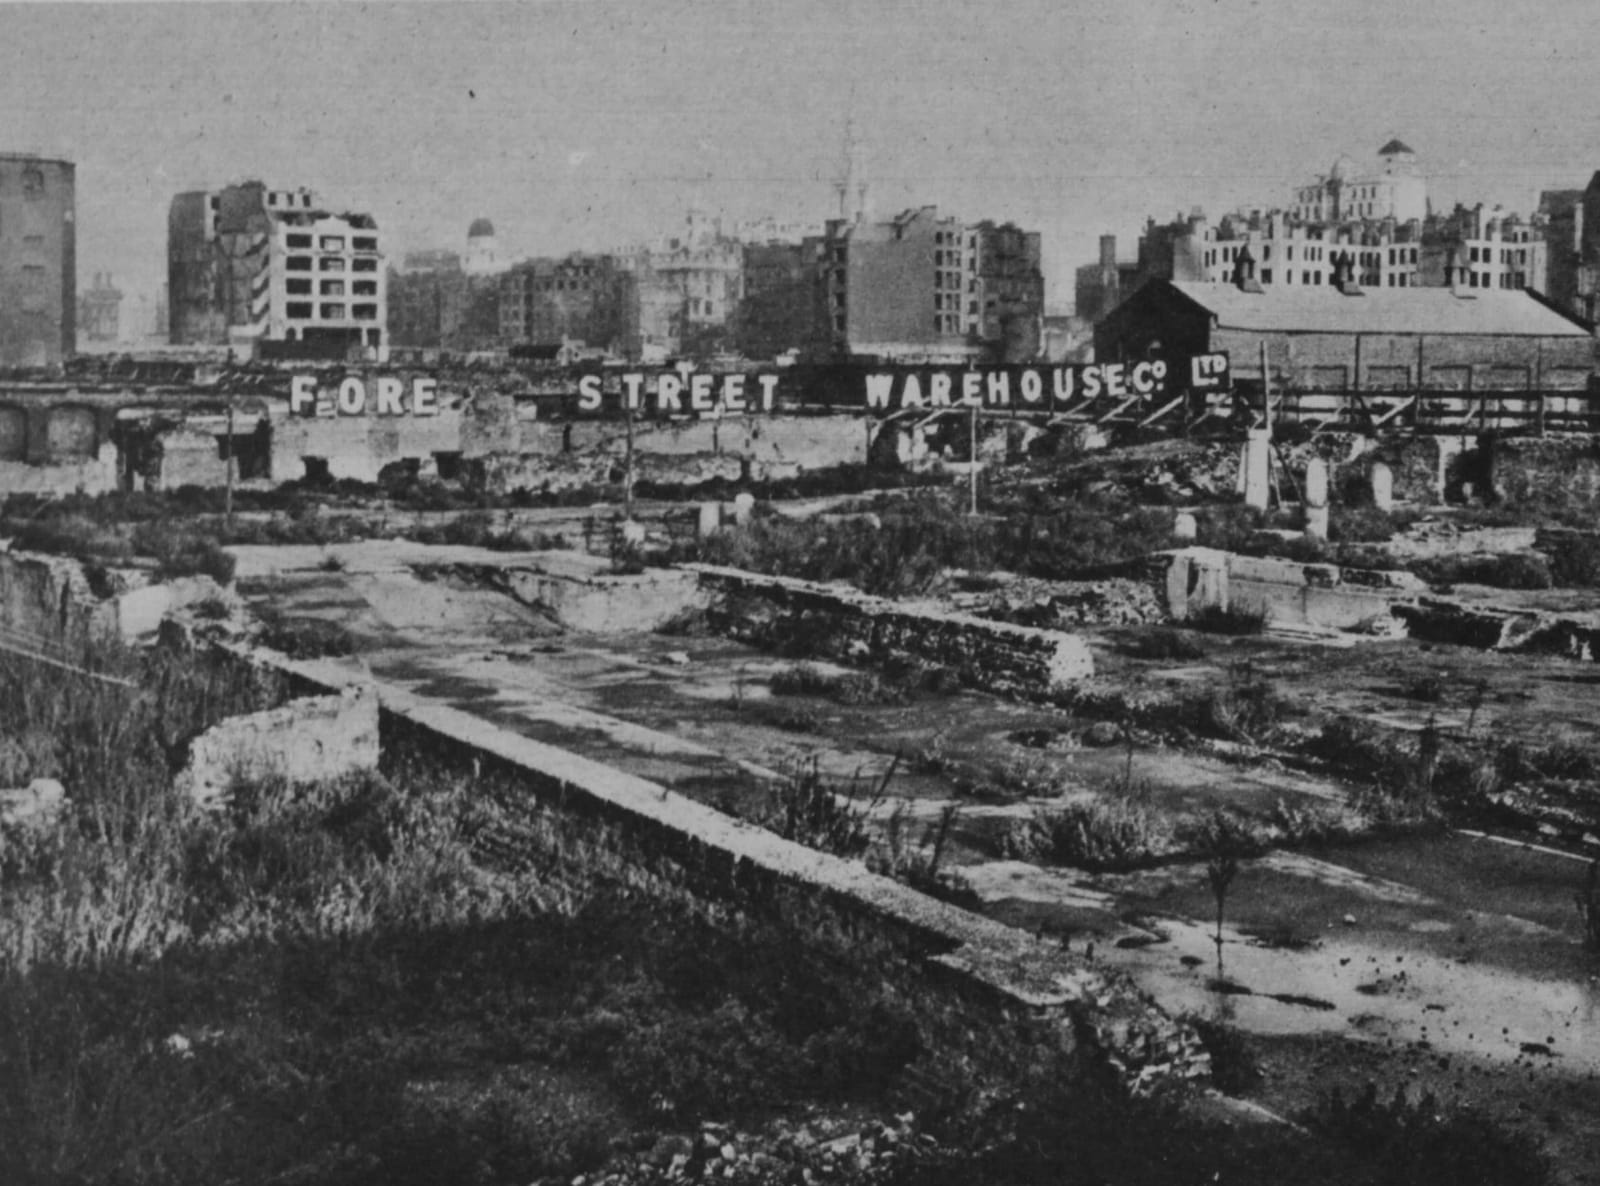 Large expanse of wasteland with bbuildings in the far distance. Large letters are mounted horizontally across a portion of the wasteland, reading "Fore Street Warehouse Co. Ltd."